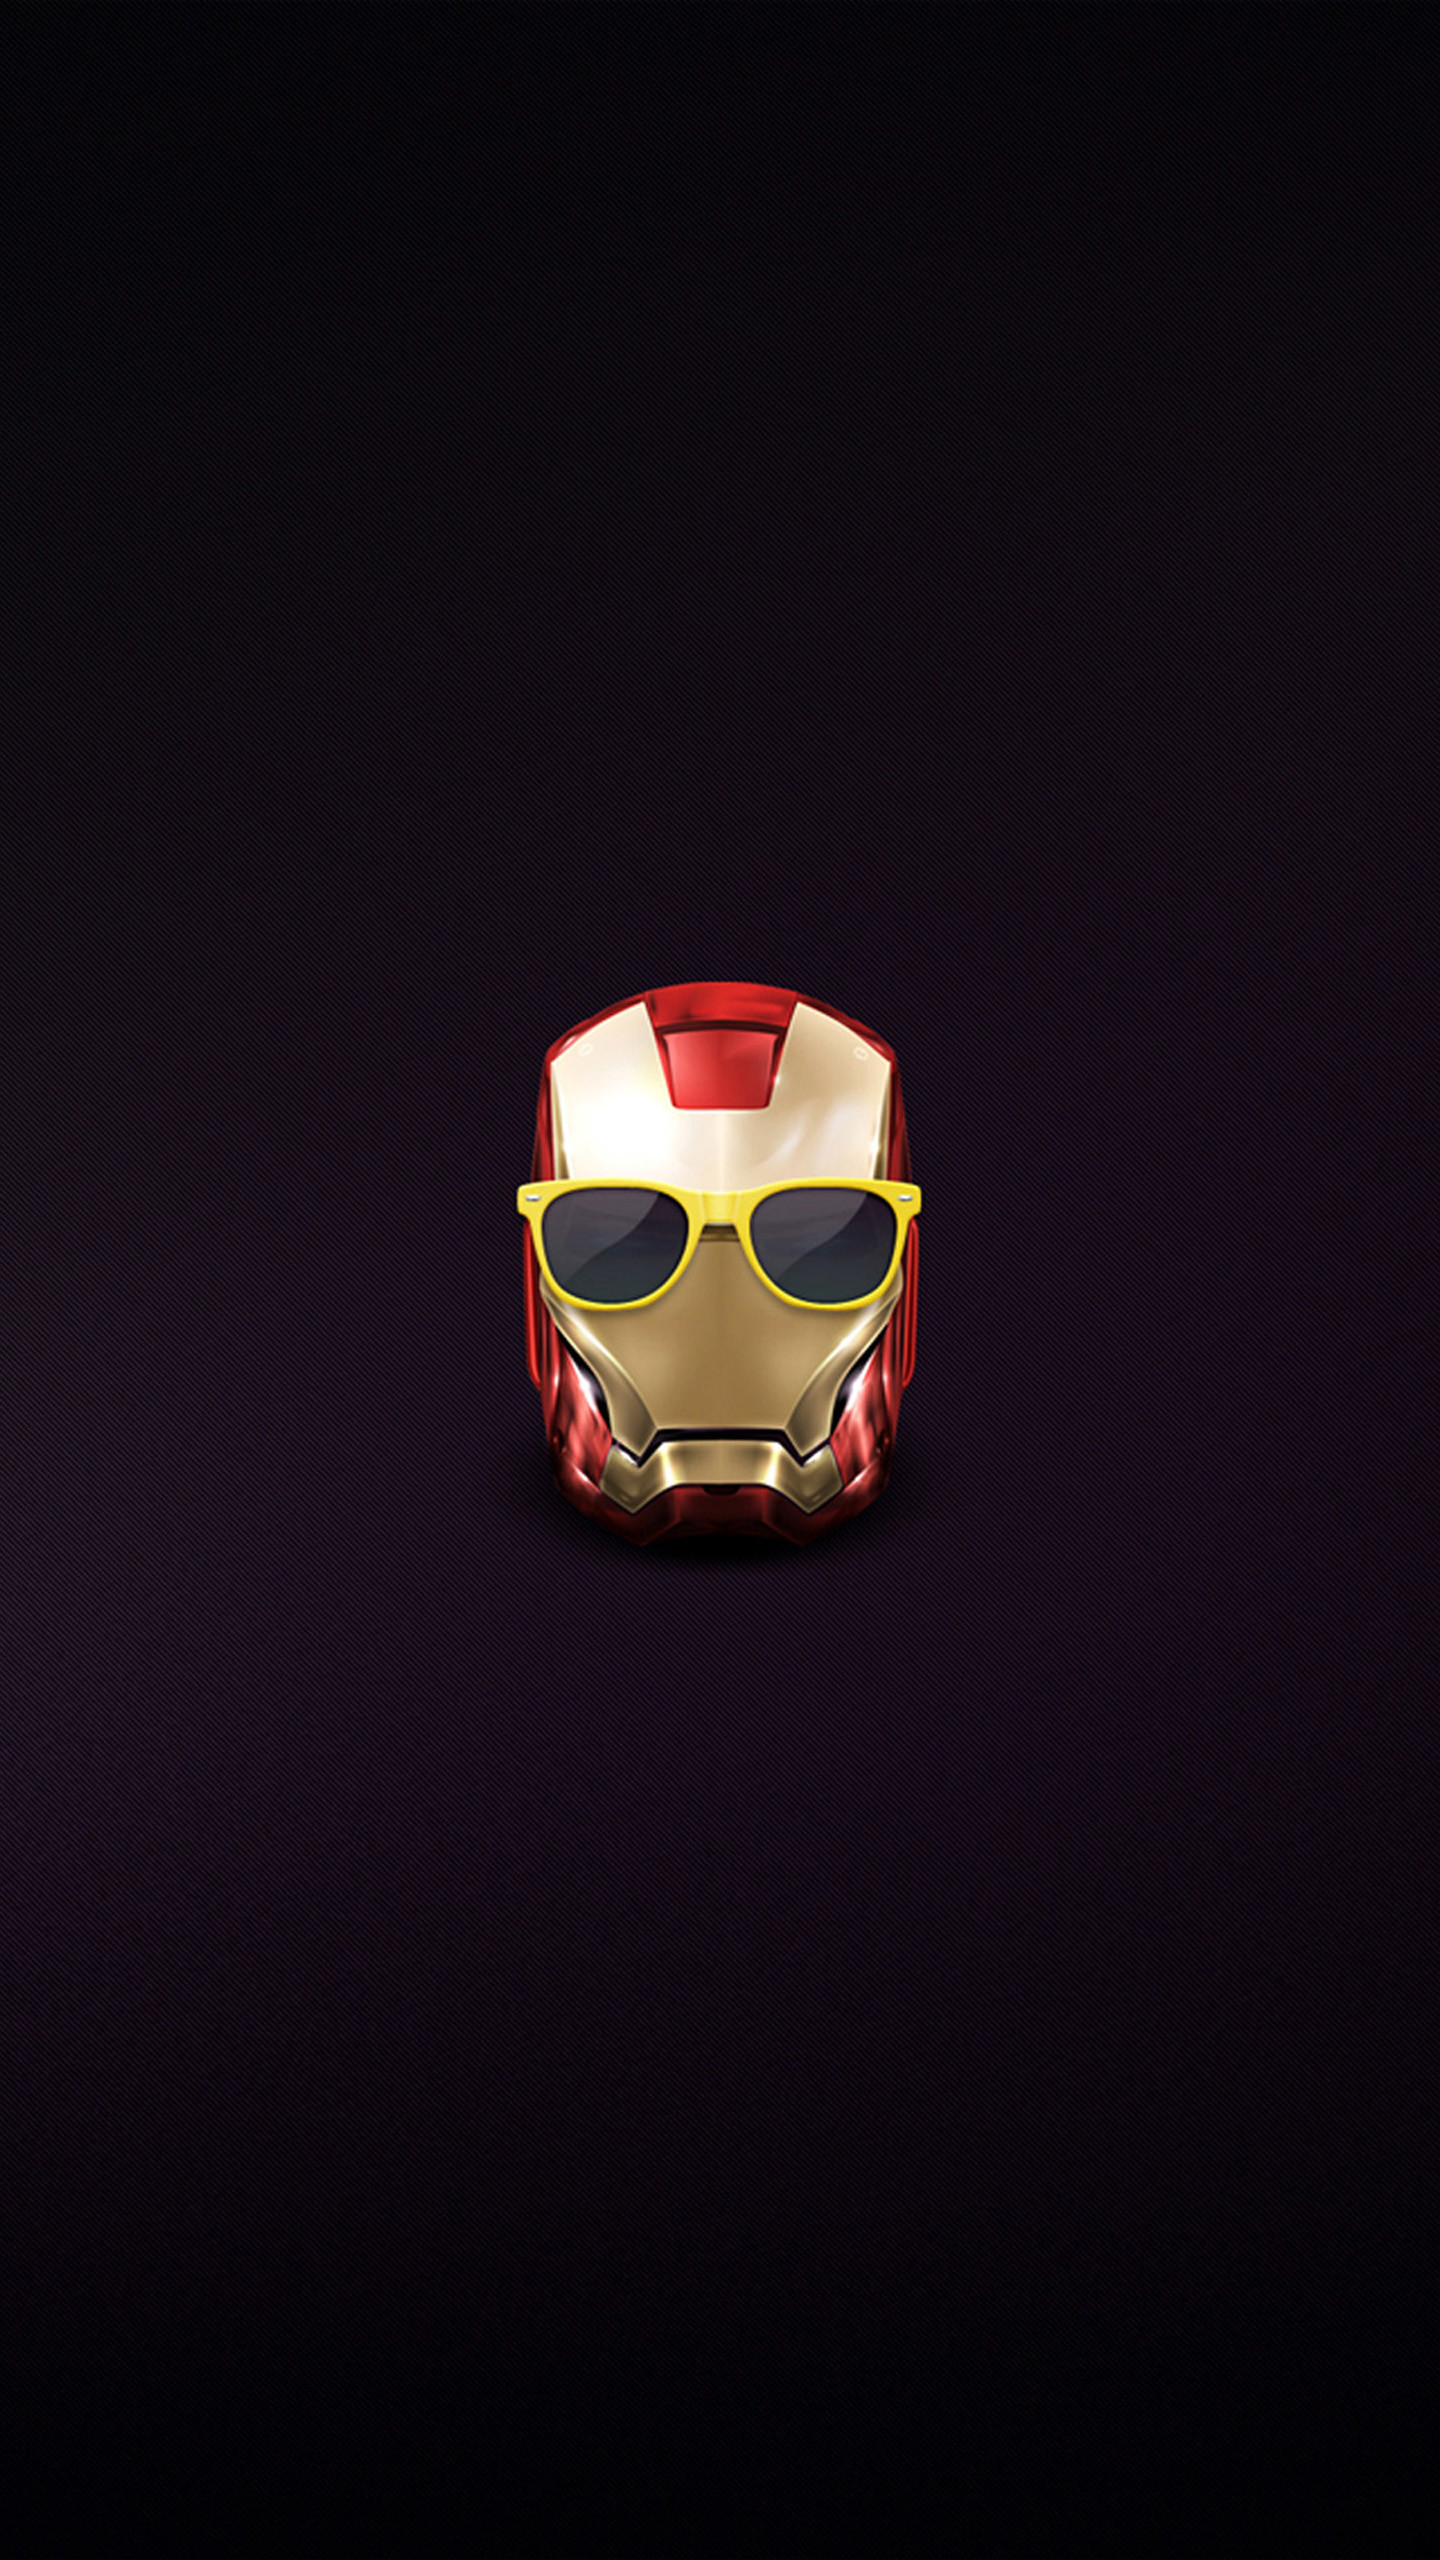 1440x2560 Hipster Iron Man 3 wallpapers for galaxy S6.jpg